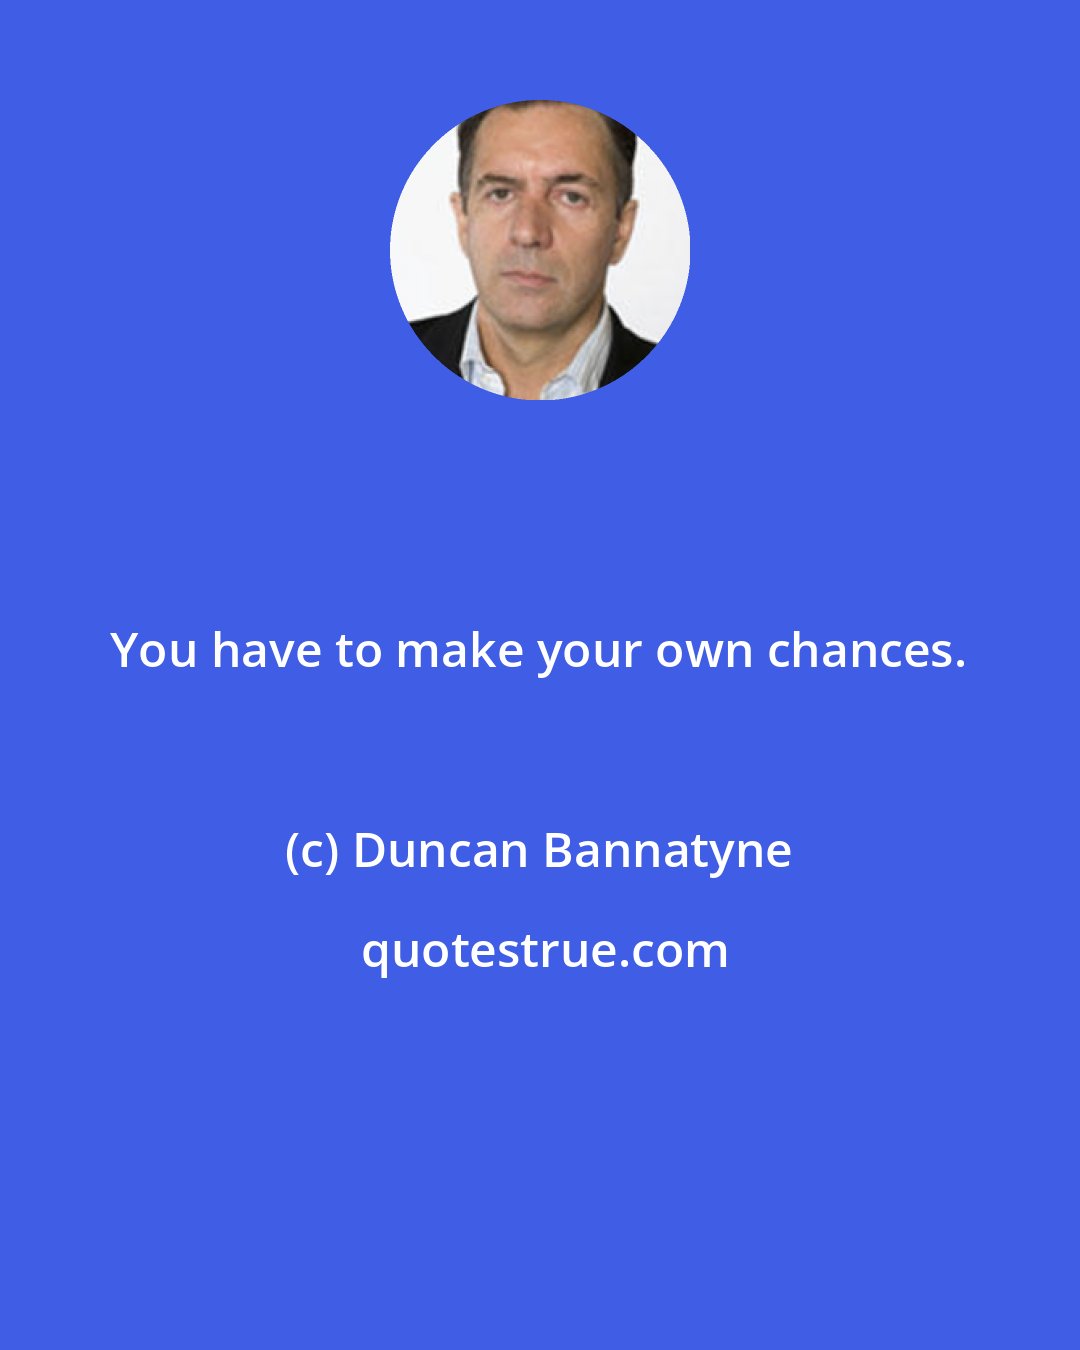 Duncan Bannatyne: You have to make your own chances.